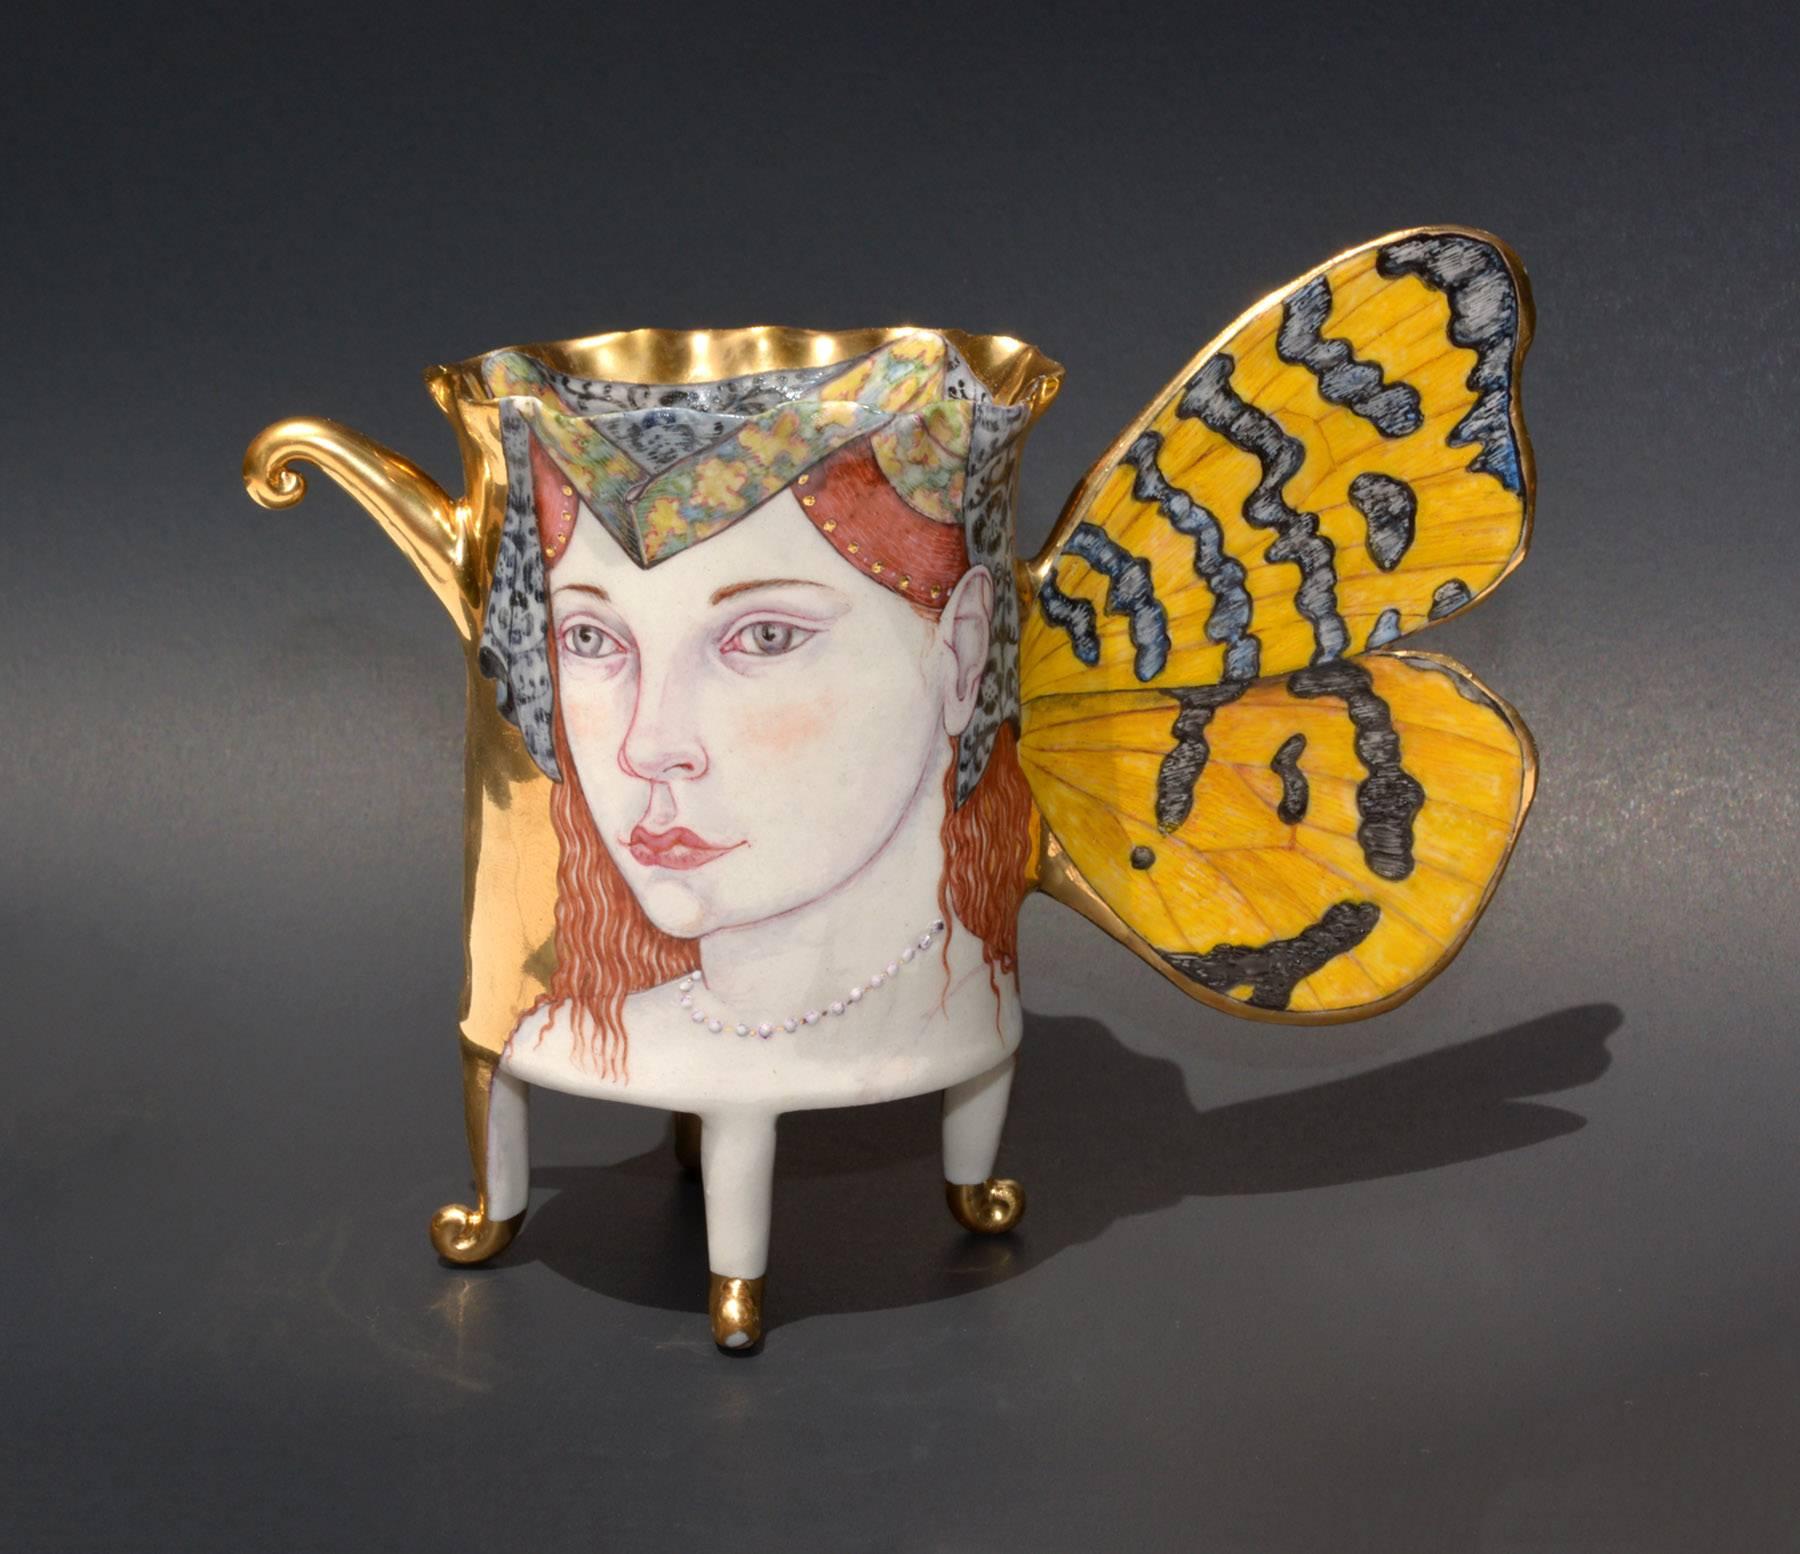 "Amphillia, Butterfly Cup", Contemporary Porcelain Sculpture with Illustration - Mixed Media Art by Irina Zaytceva